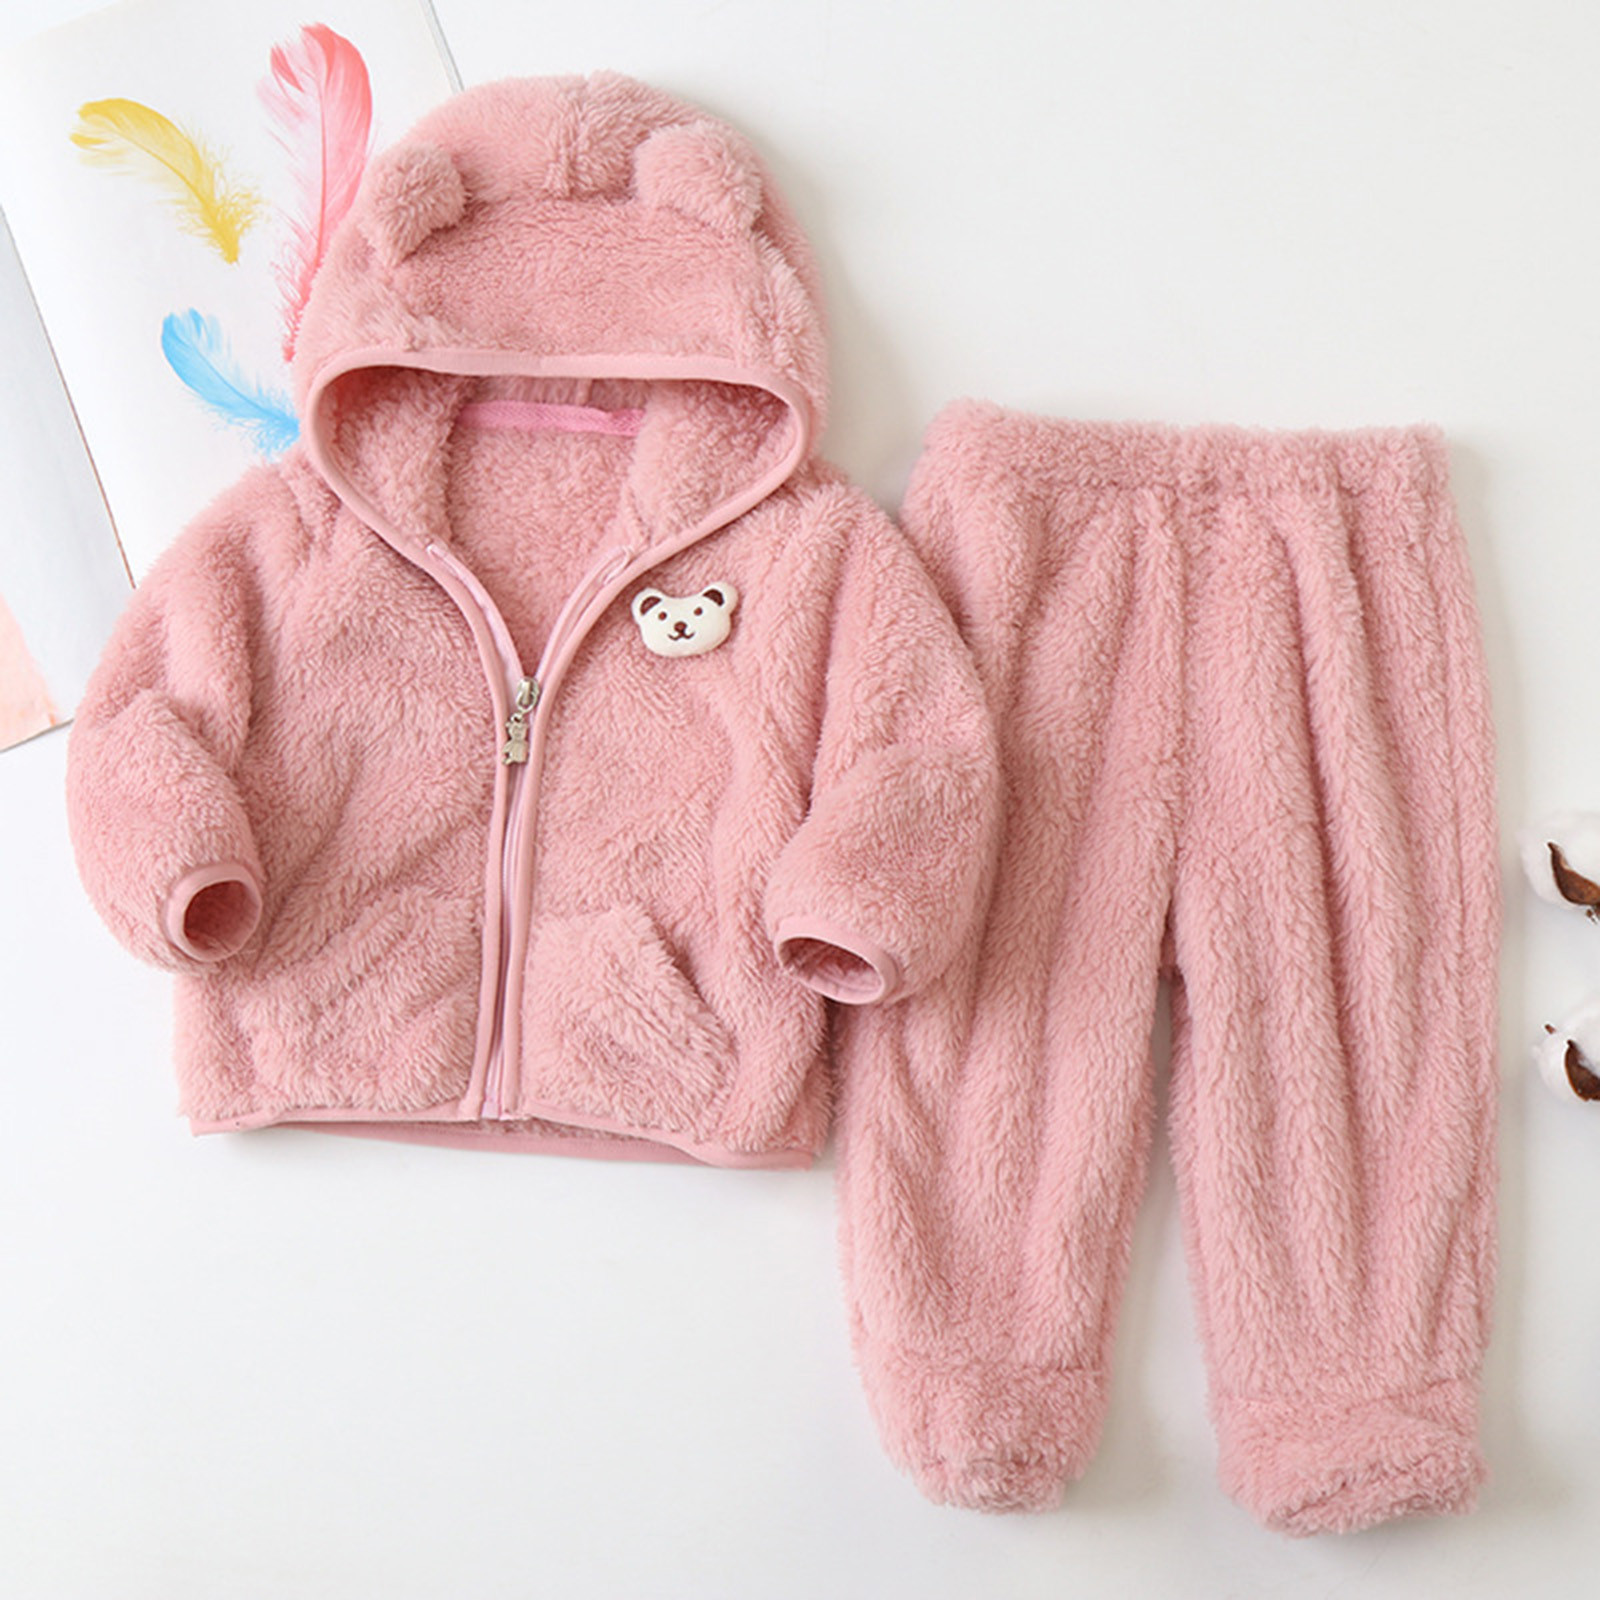 Dinosaur Jacket Toddler Baby Boy Girl Jacket Winter Clothes Hooded Coat Tops With Bear Ears Pants Sweater 2PCS Outfits Set Wool Trench Coat Boys - image 2 of 9